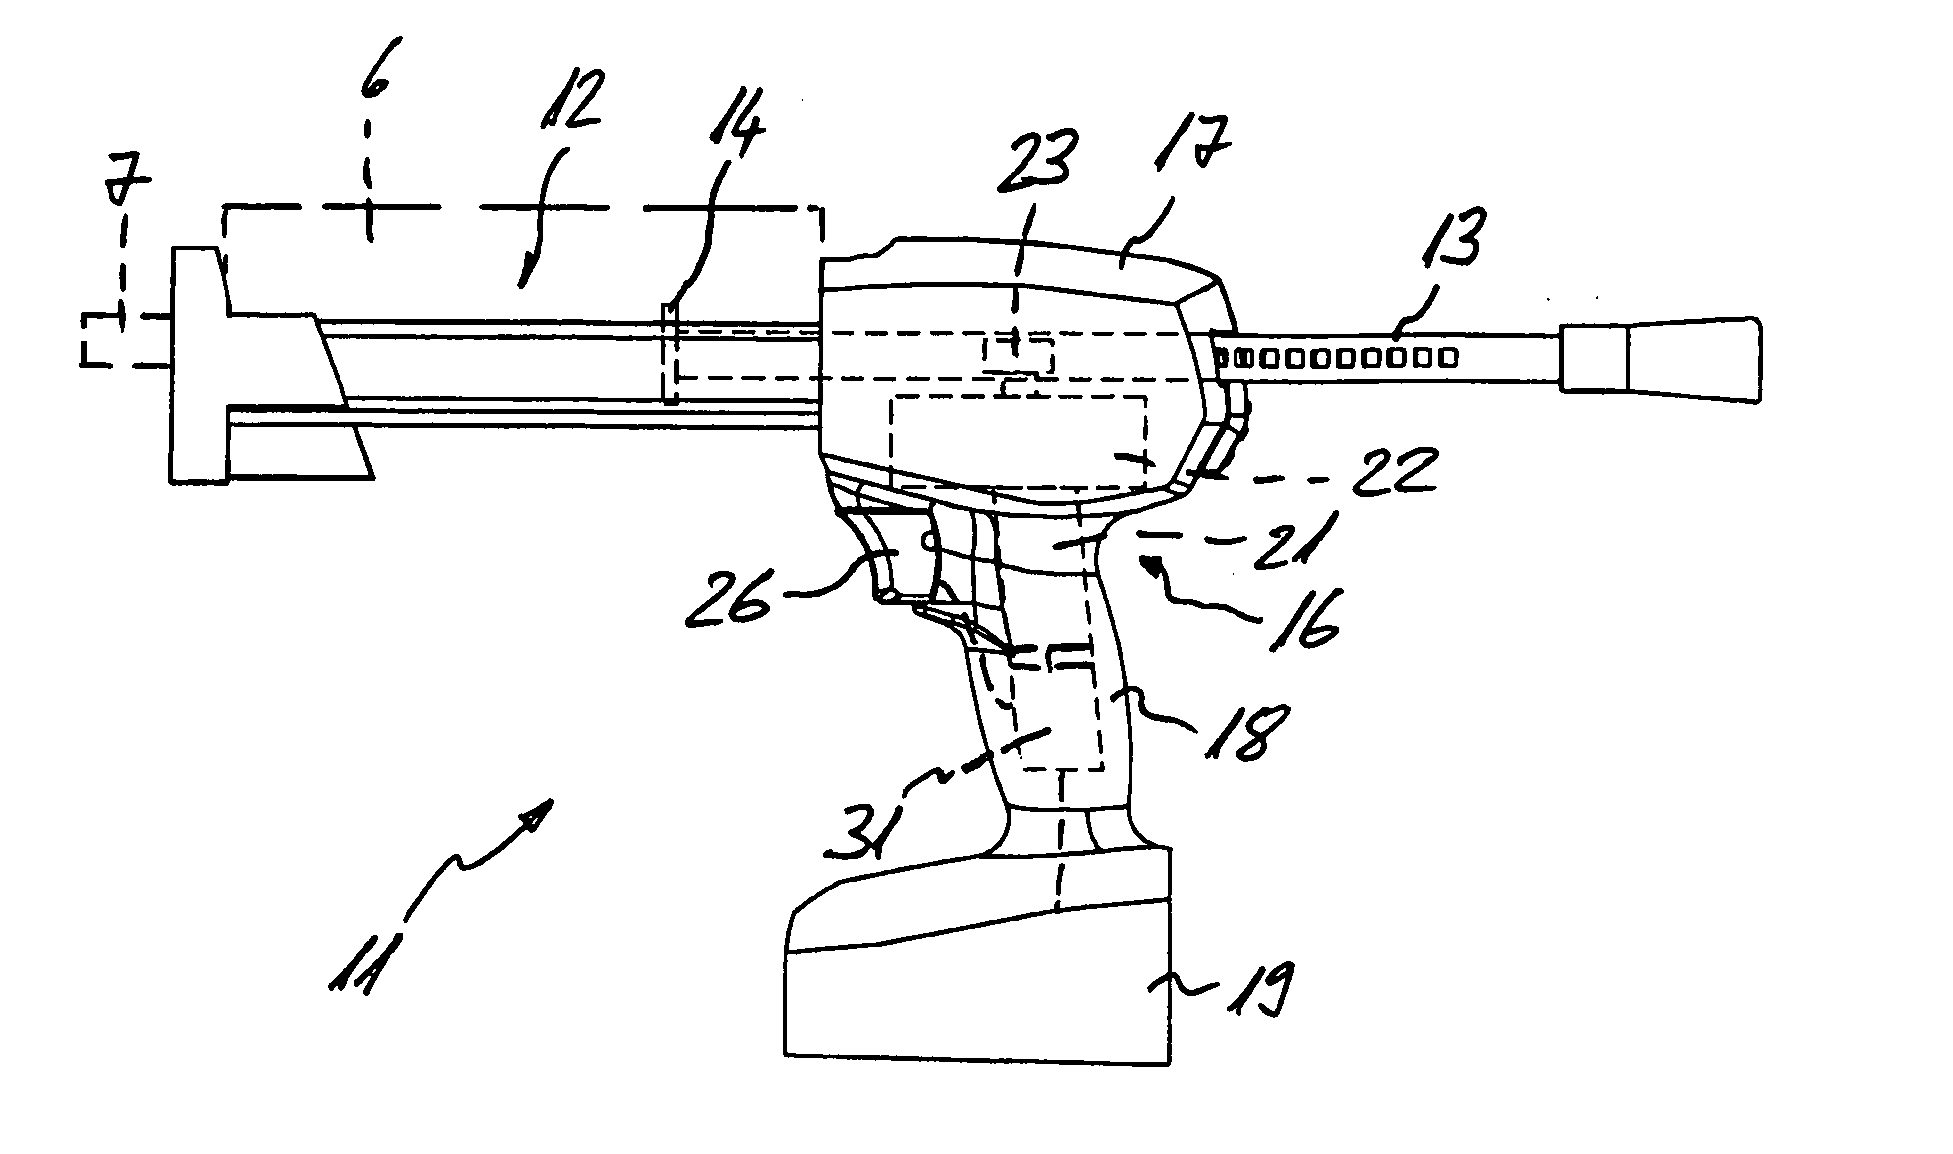 Extrusion device